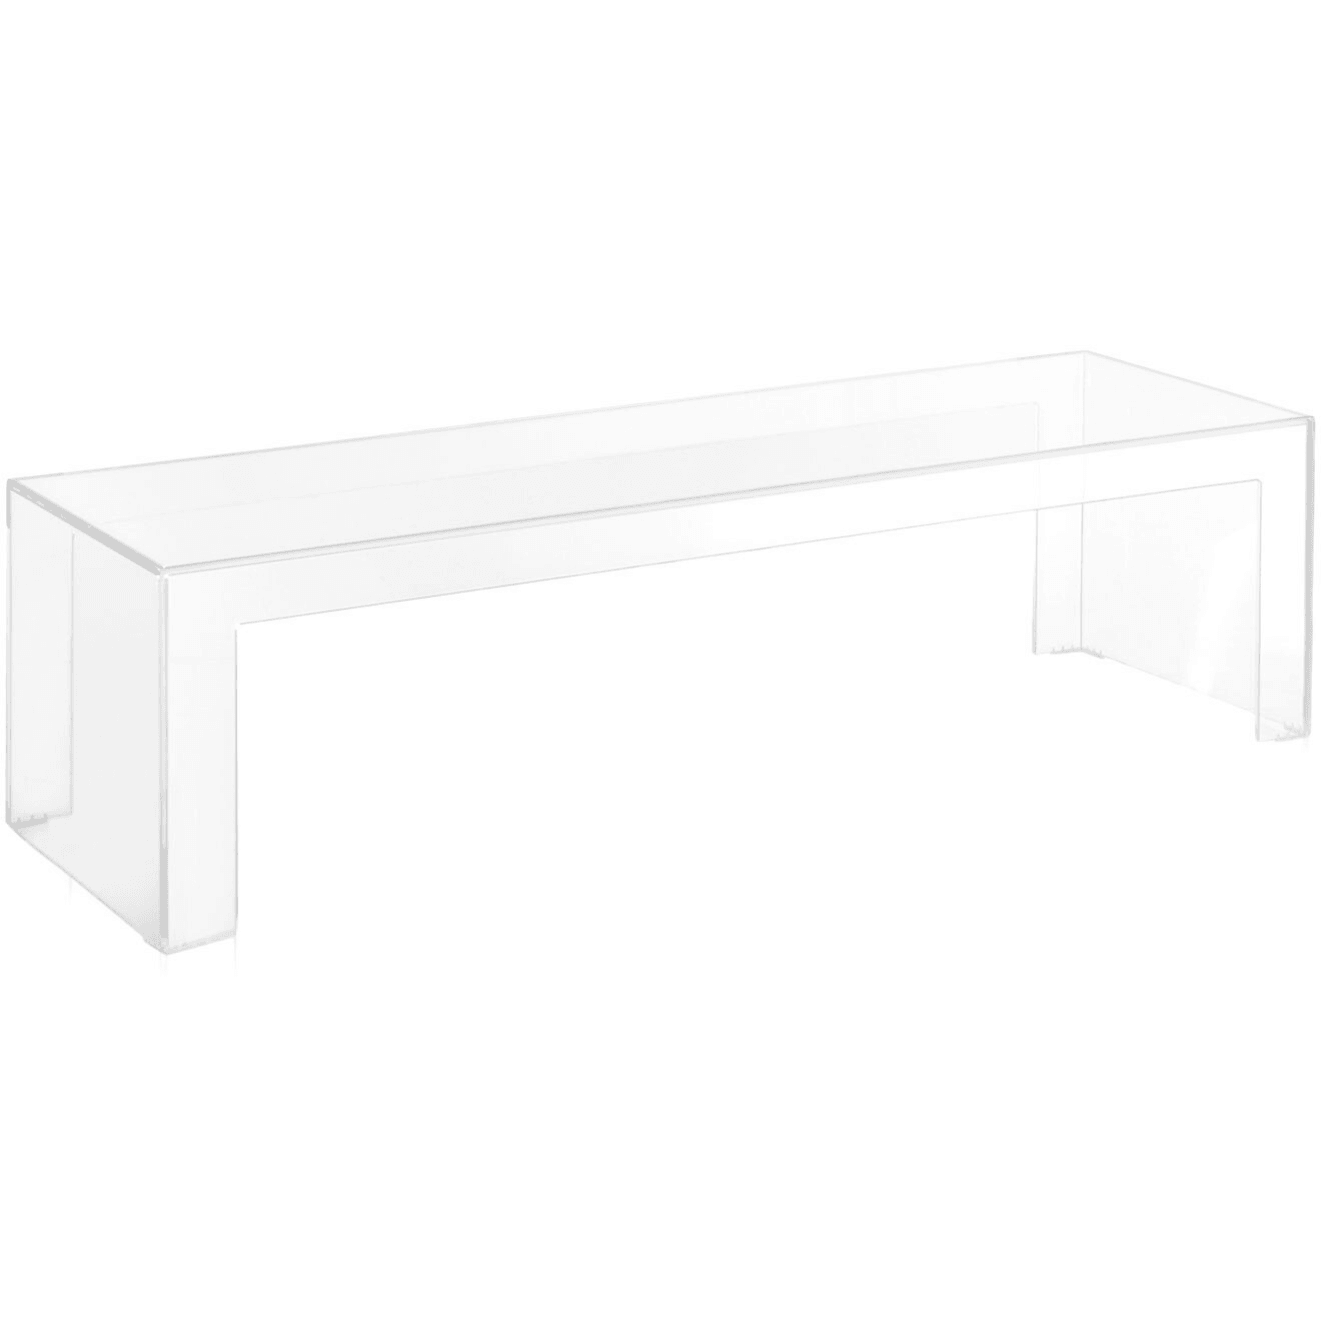 Invisible Table - Curated Furniture $1000-$2000, dining table, in stock and ready to ship, kartell, Memorial Weekend Sale, table, tables